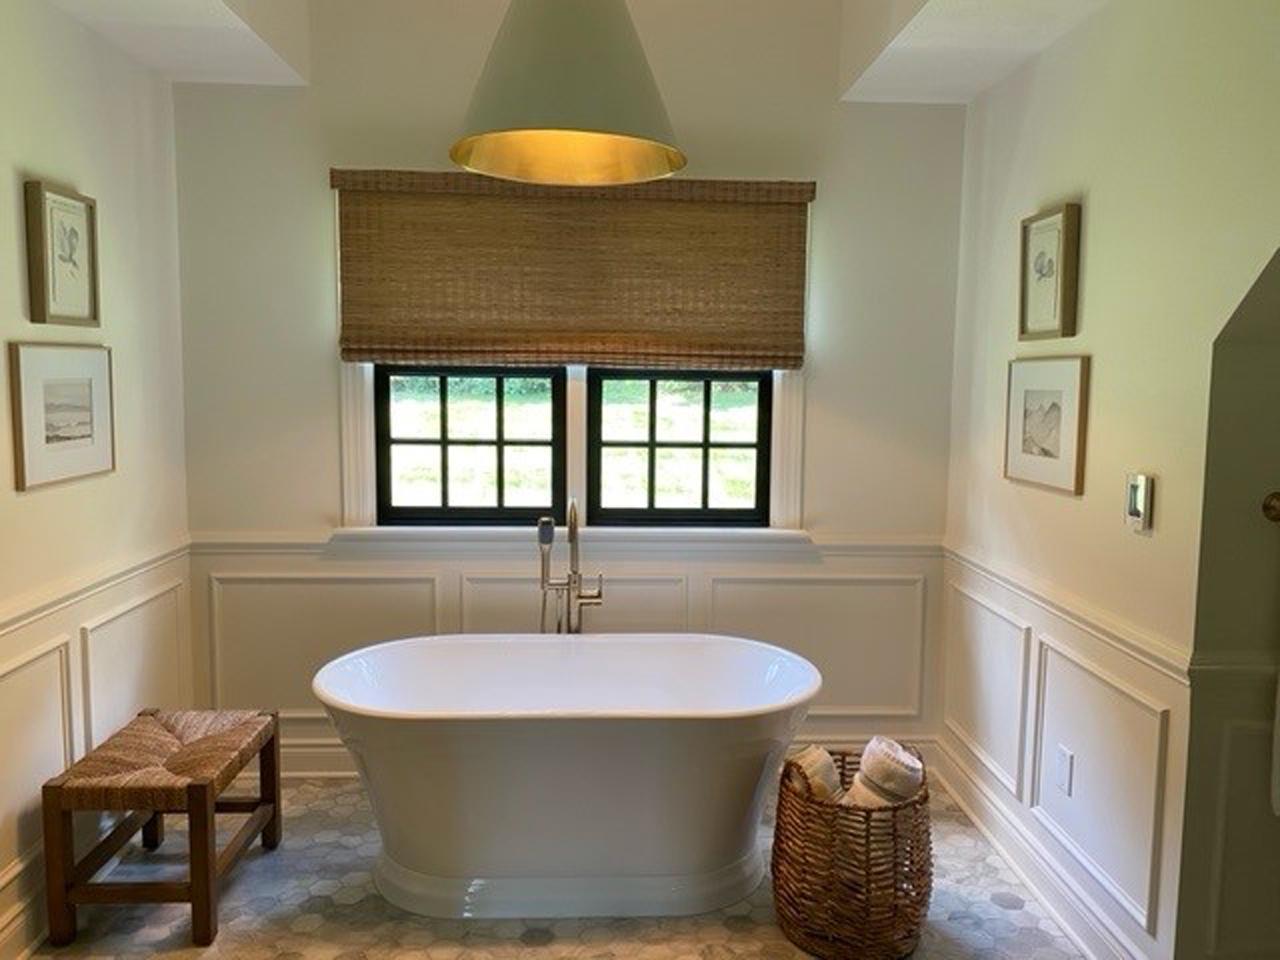 Woven wood shades over a tub